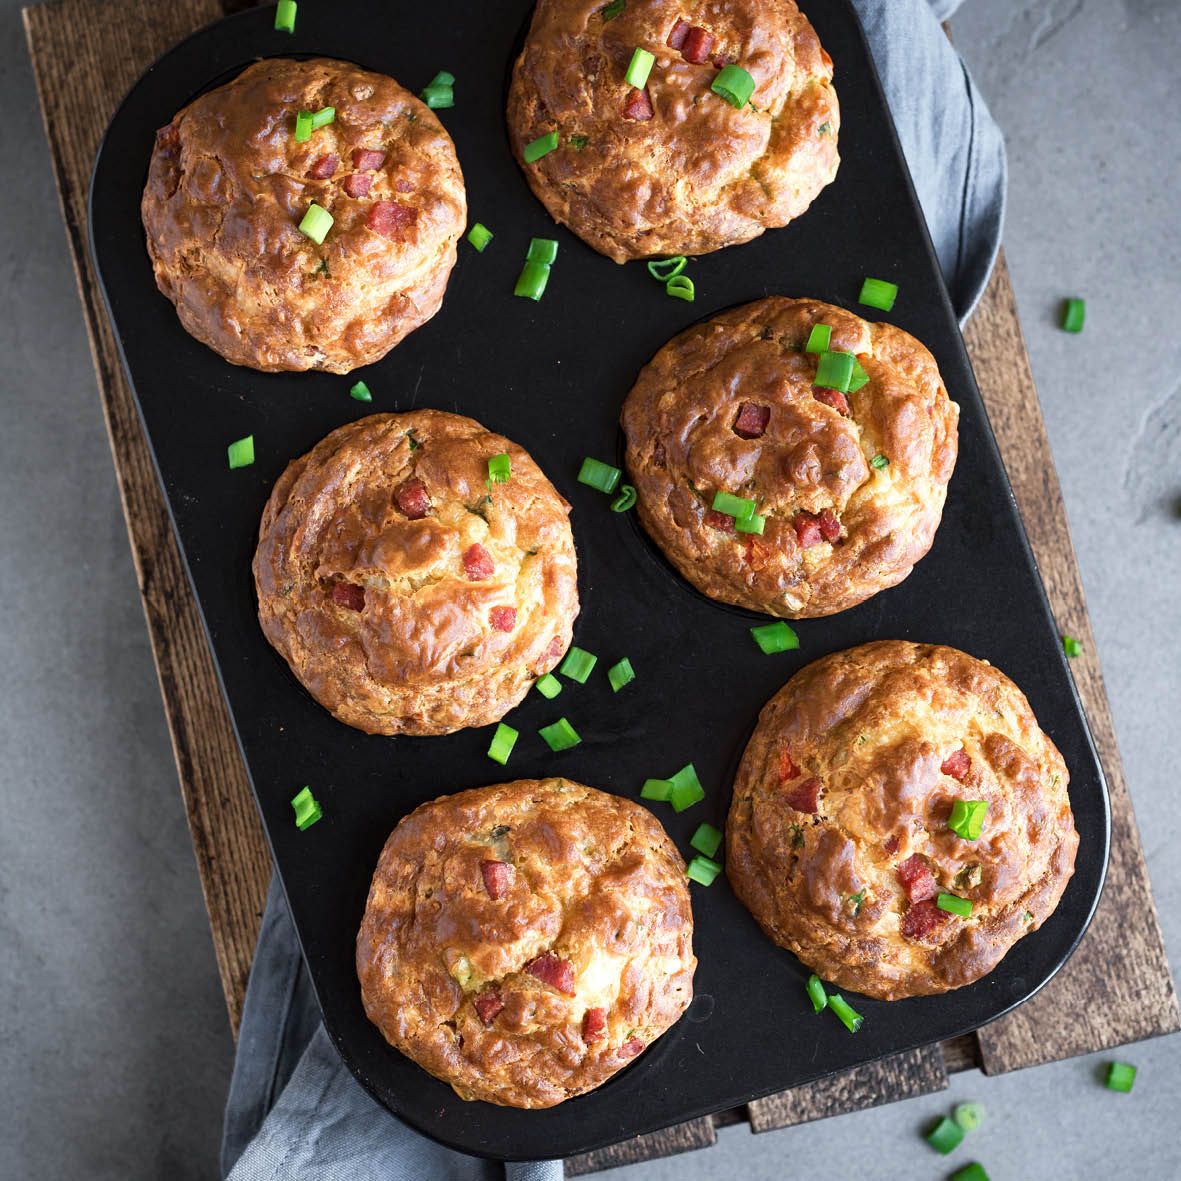 Bacon_Egg_and_Cheese_Breakfast_Muffins.jpg